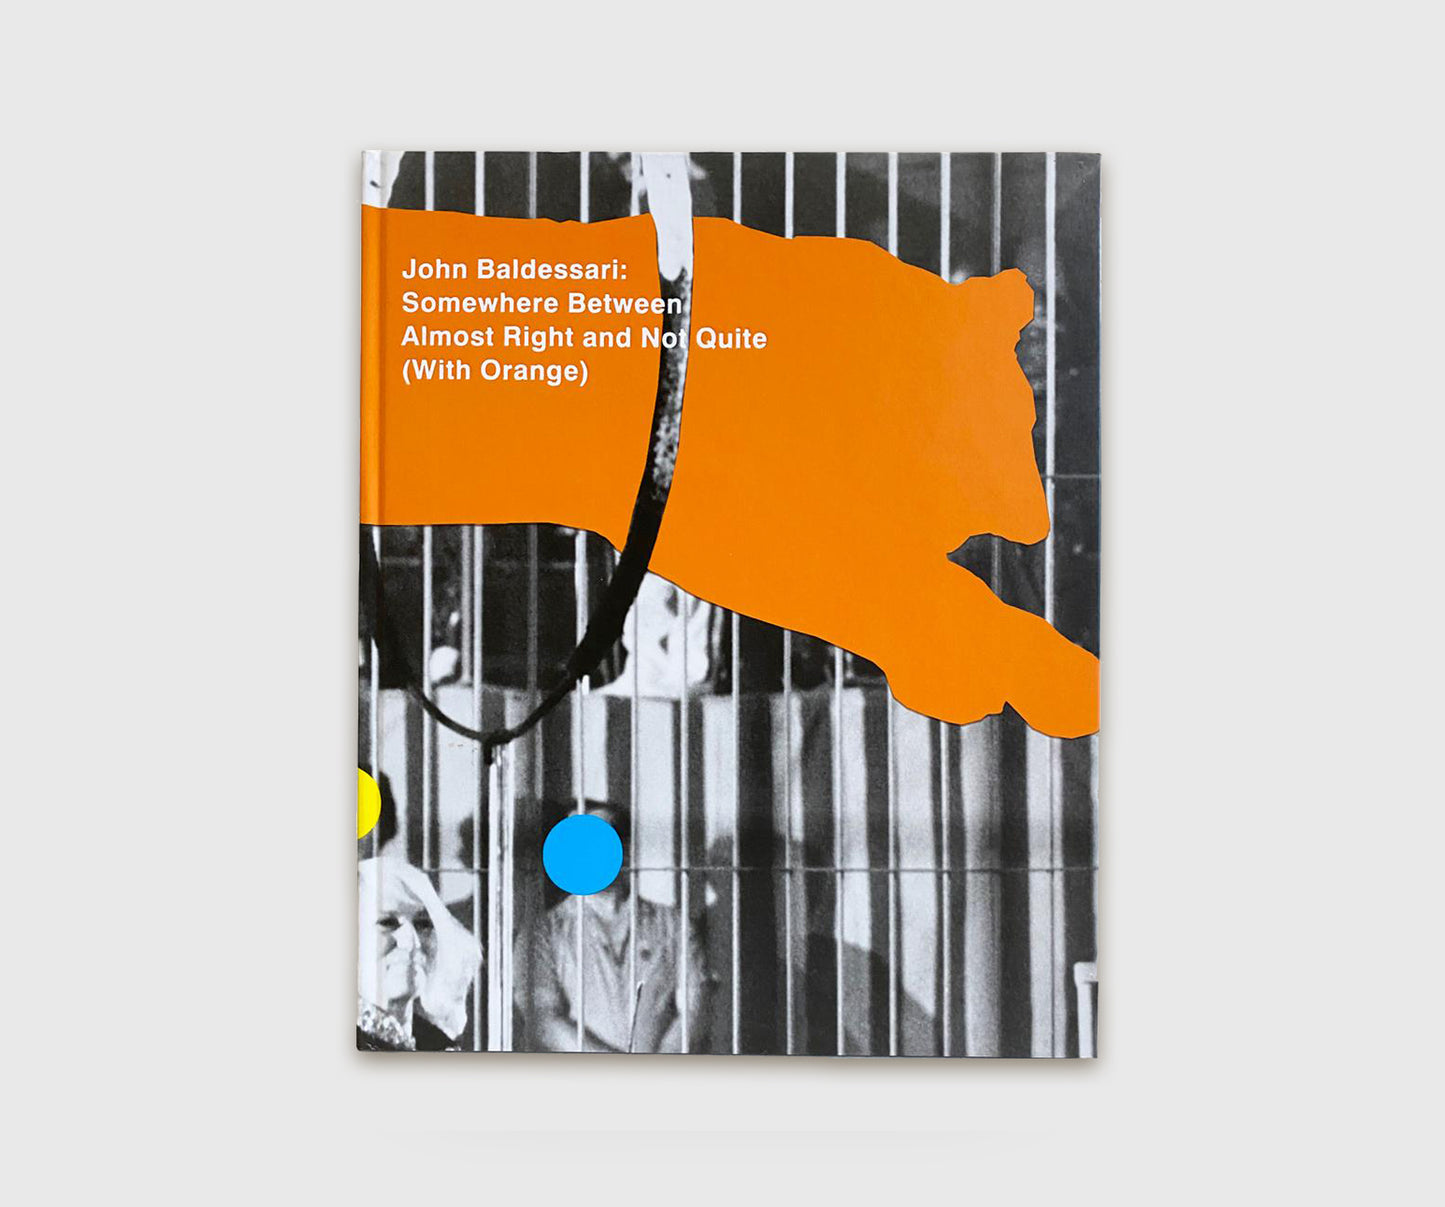 John Baldessari: Somewhere Between Almost Right and Not Quite (With Orange)